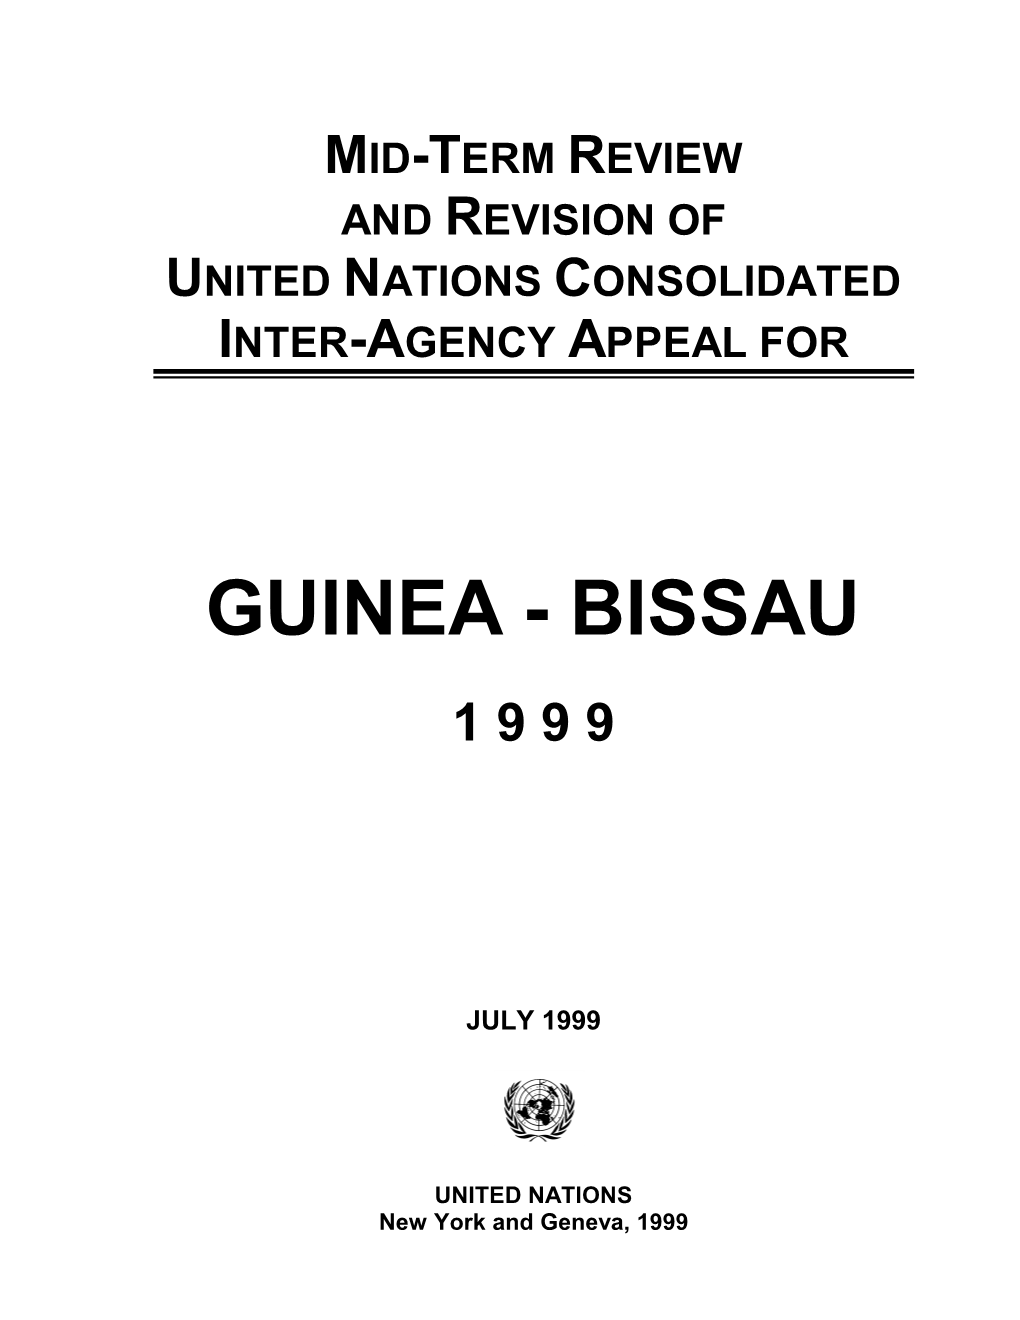 1999 Mid-Term Appeal Review for Guinea-Bissau